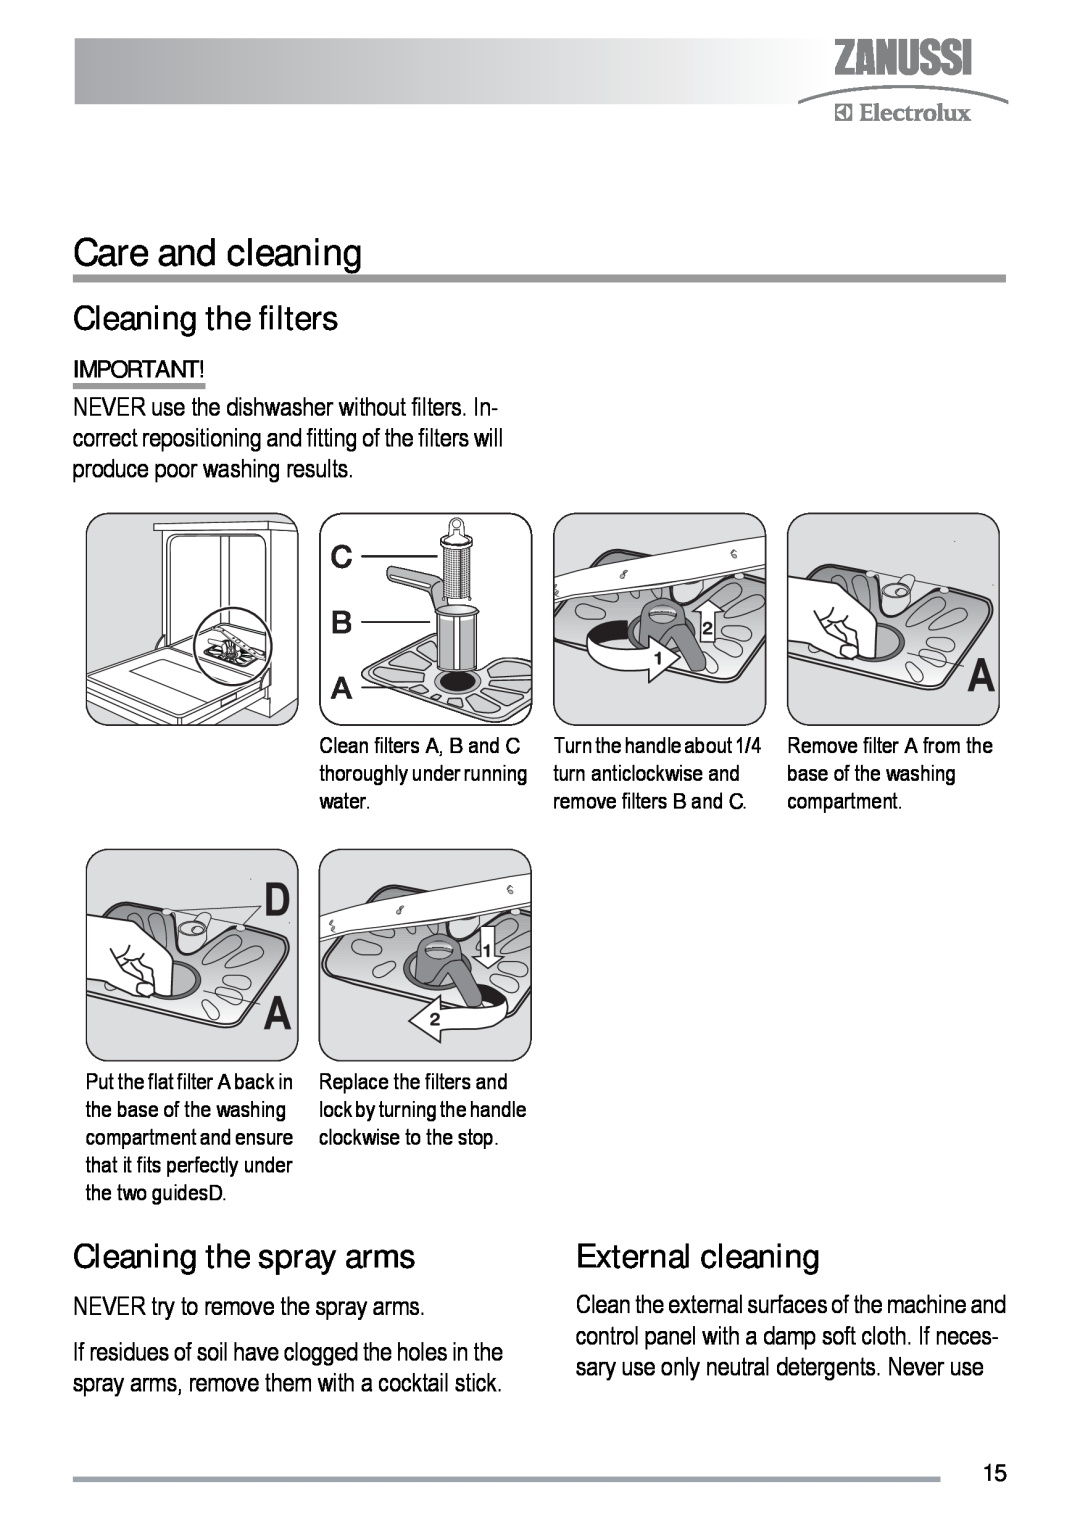 Zanussi ZDF 131 manual Care and cleaning, Cleaning the filters, Cleaning the spray arms, External cleaning 